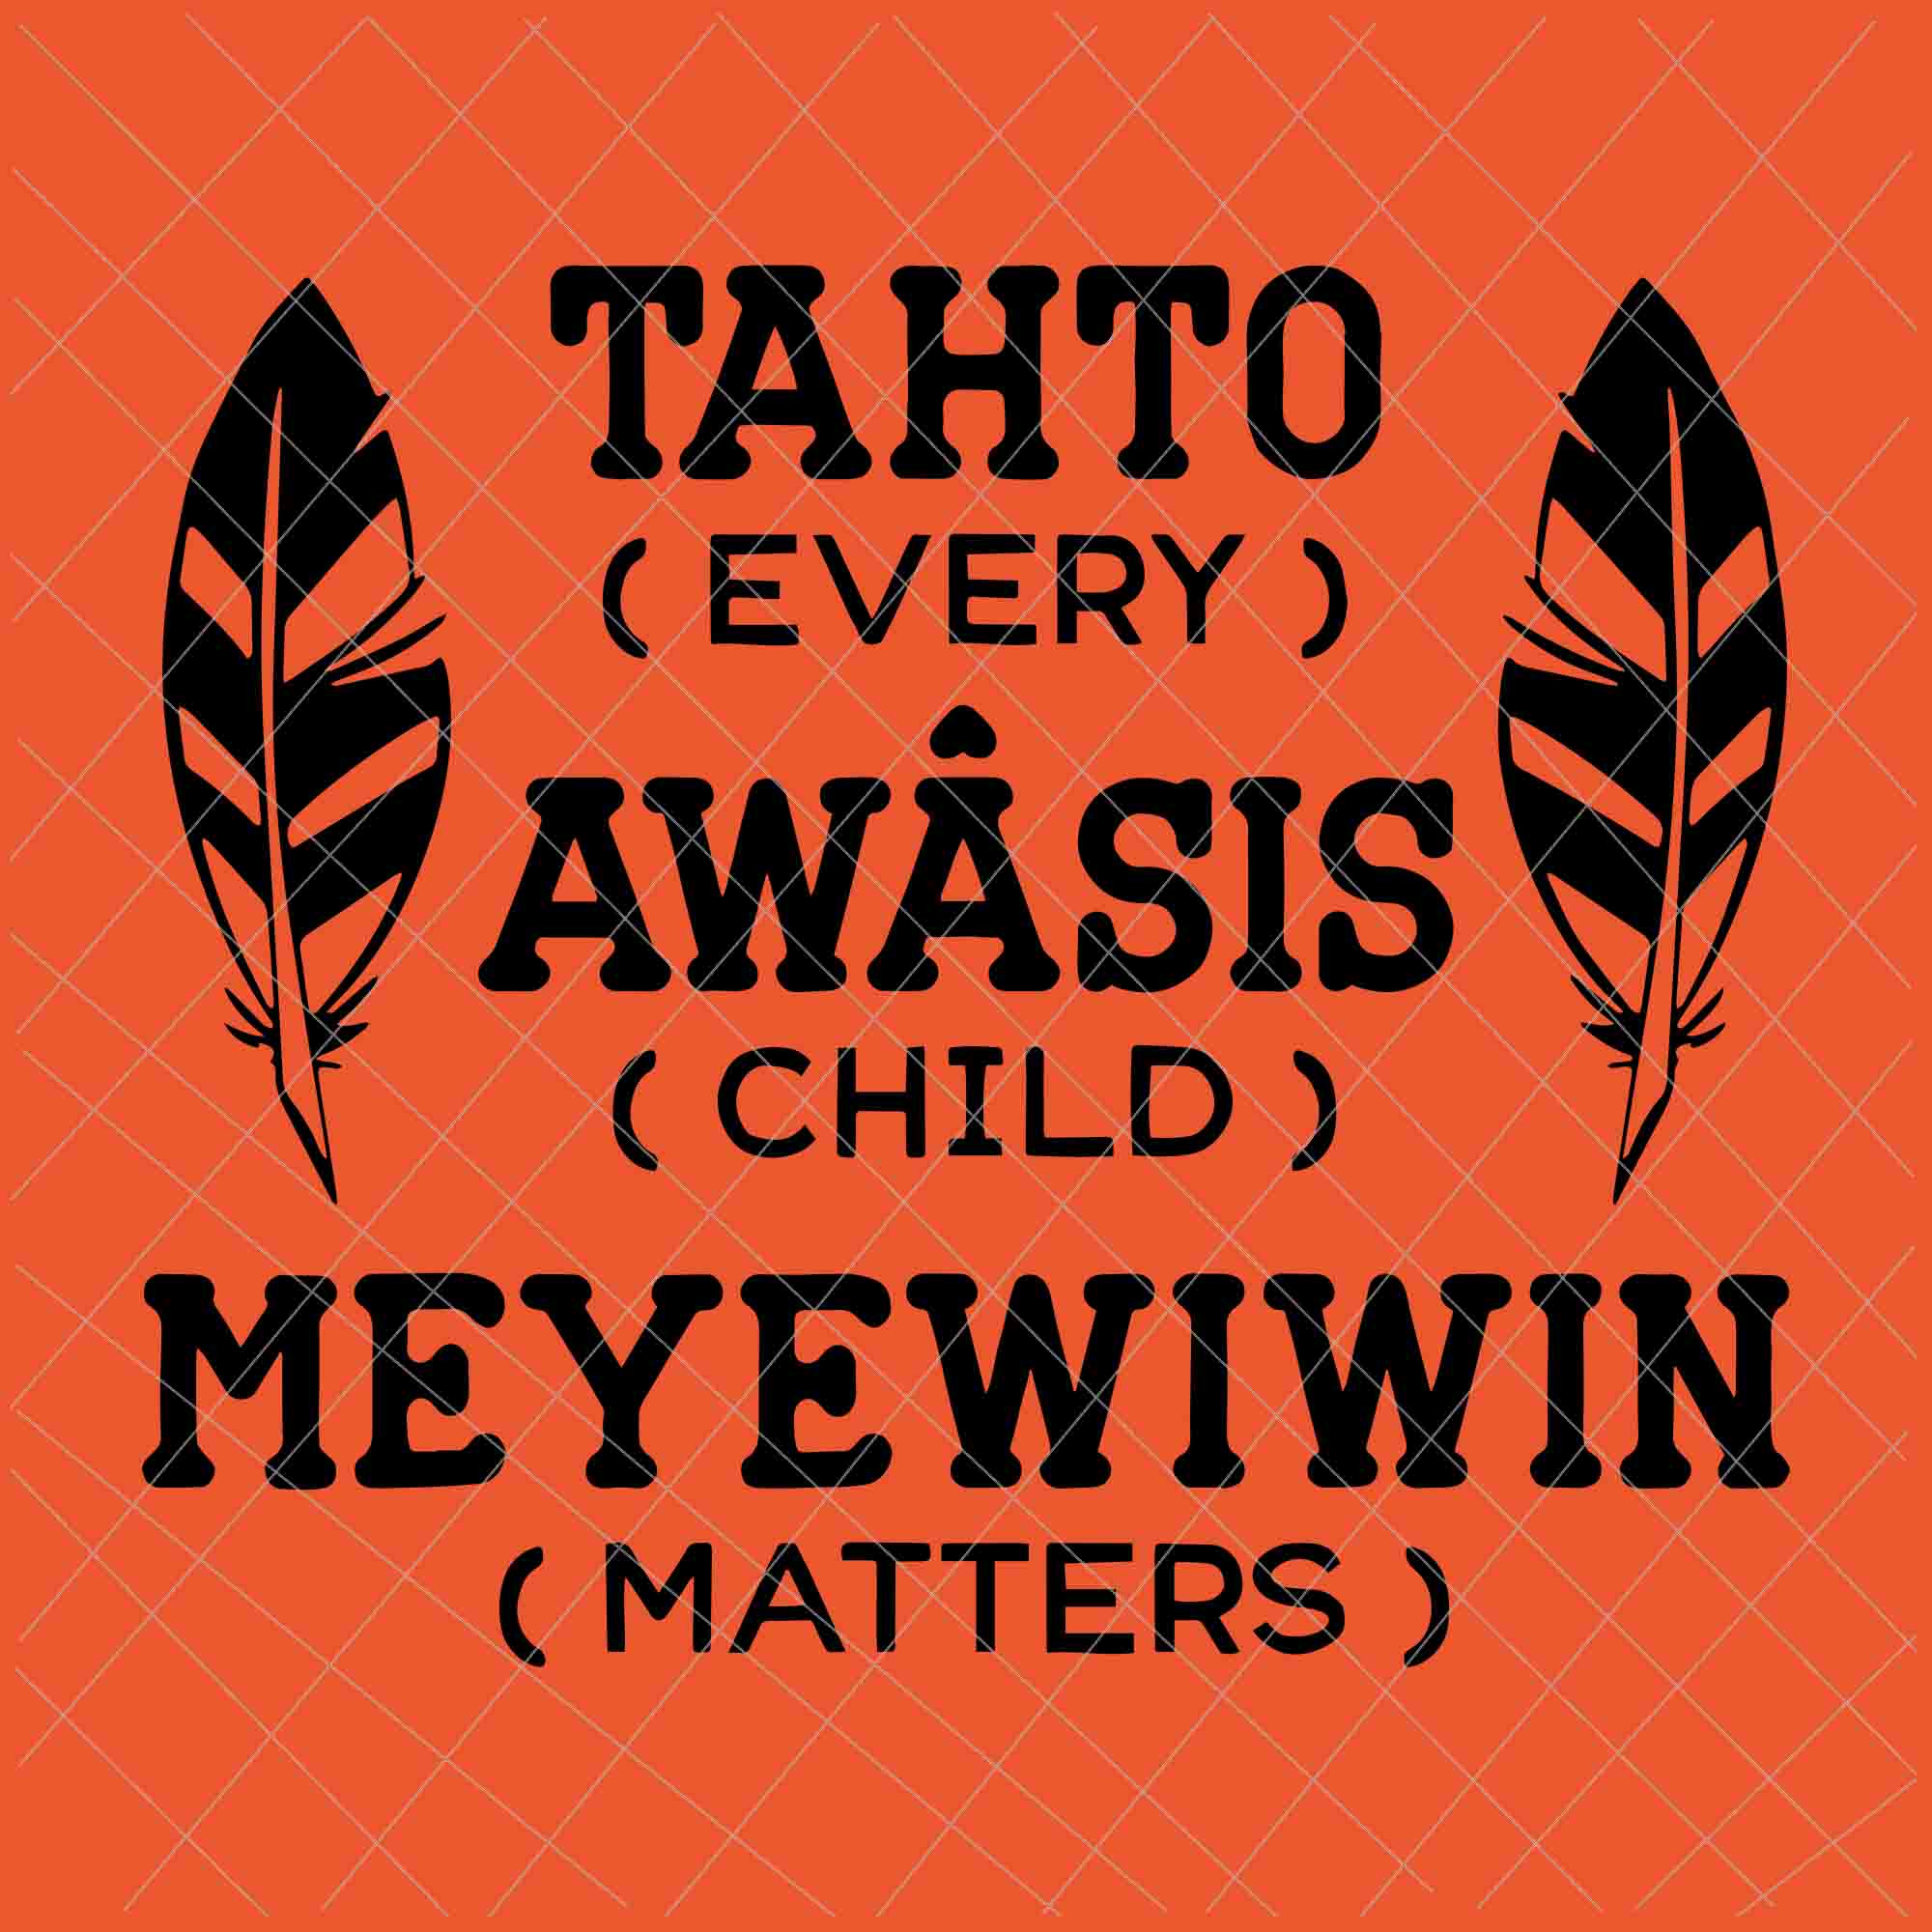 Tahto Awasis Meyewiwin Svg, Every Child Matters Svg, Orange Day Svg, Residential Schools Svg, Indigenous Education Orange Day Svg